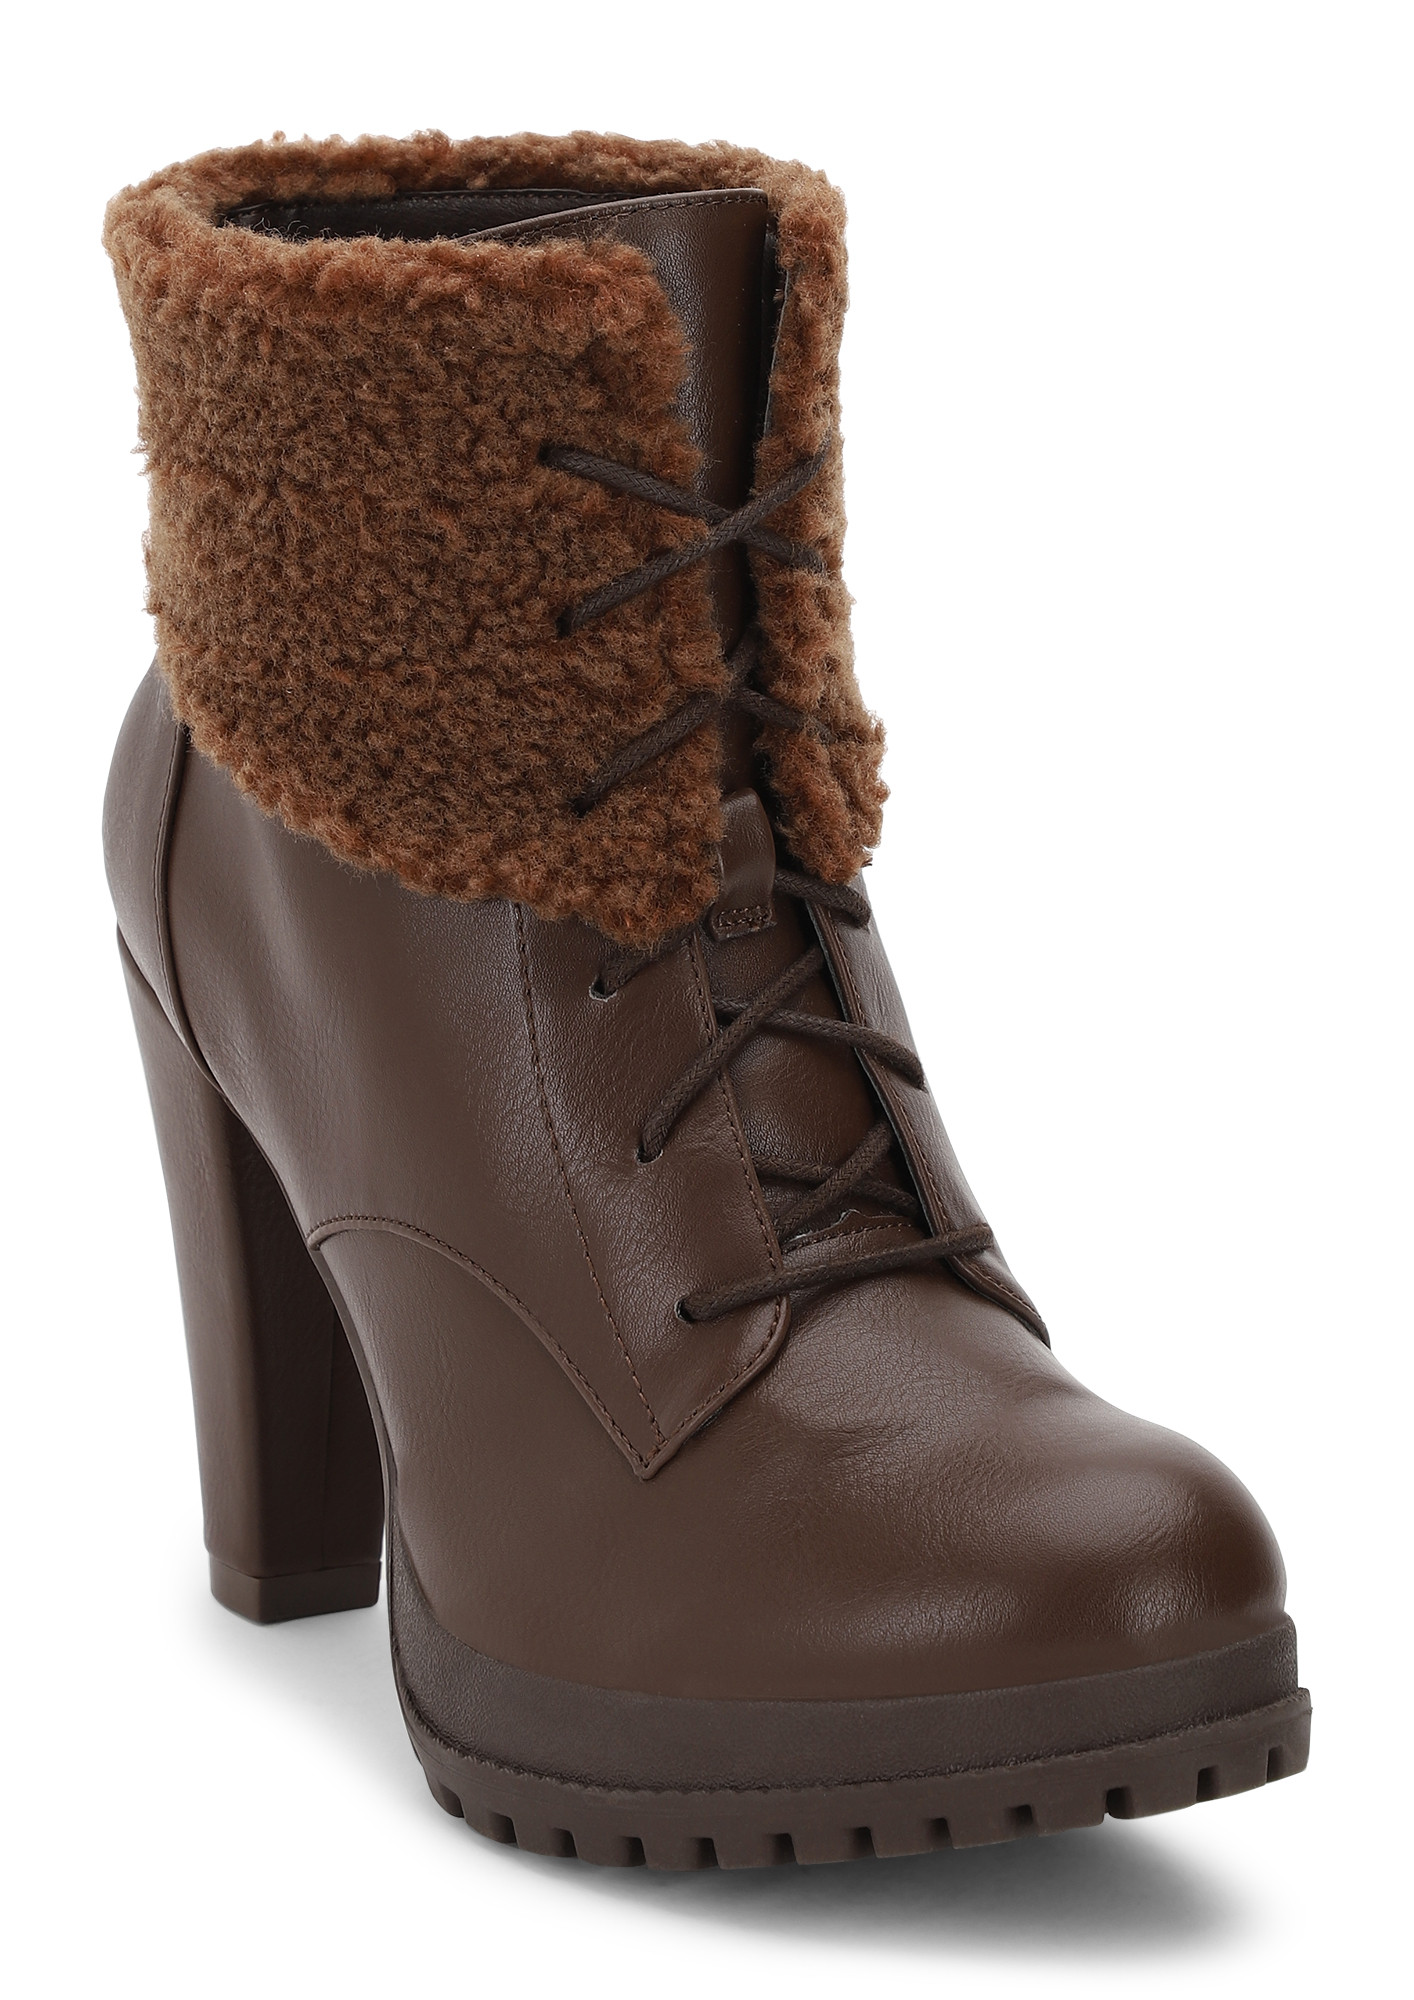 THE SOVIET EFFECT BROWN COMBAT BOOTS